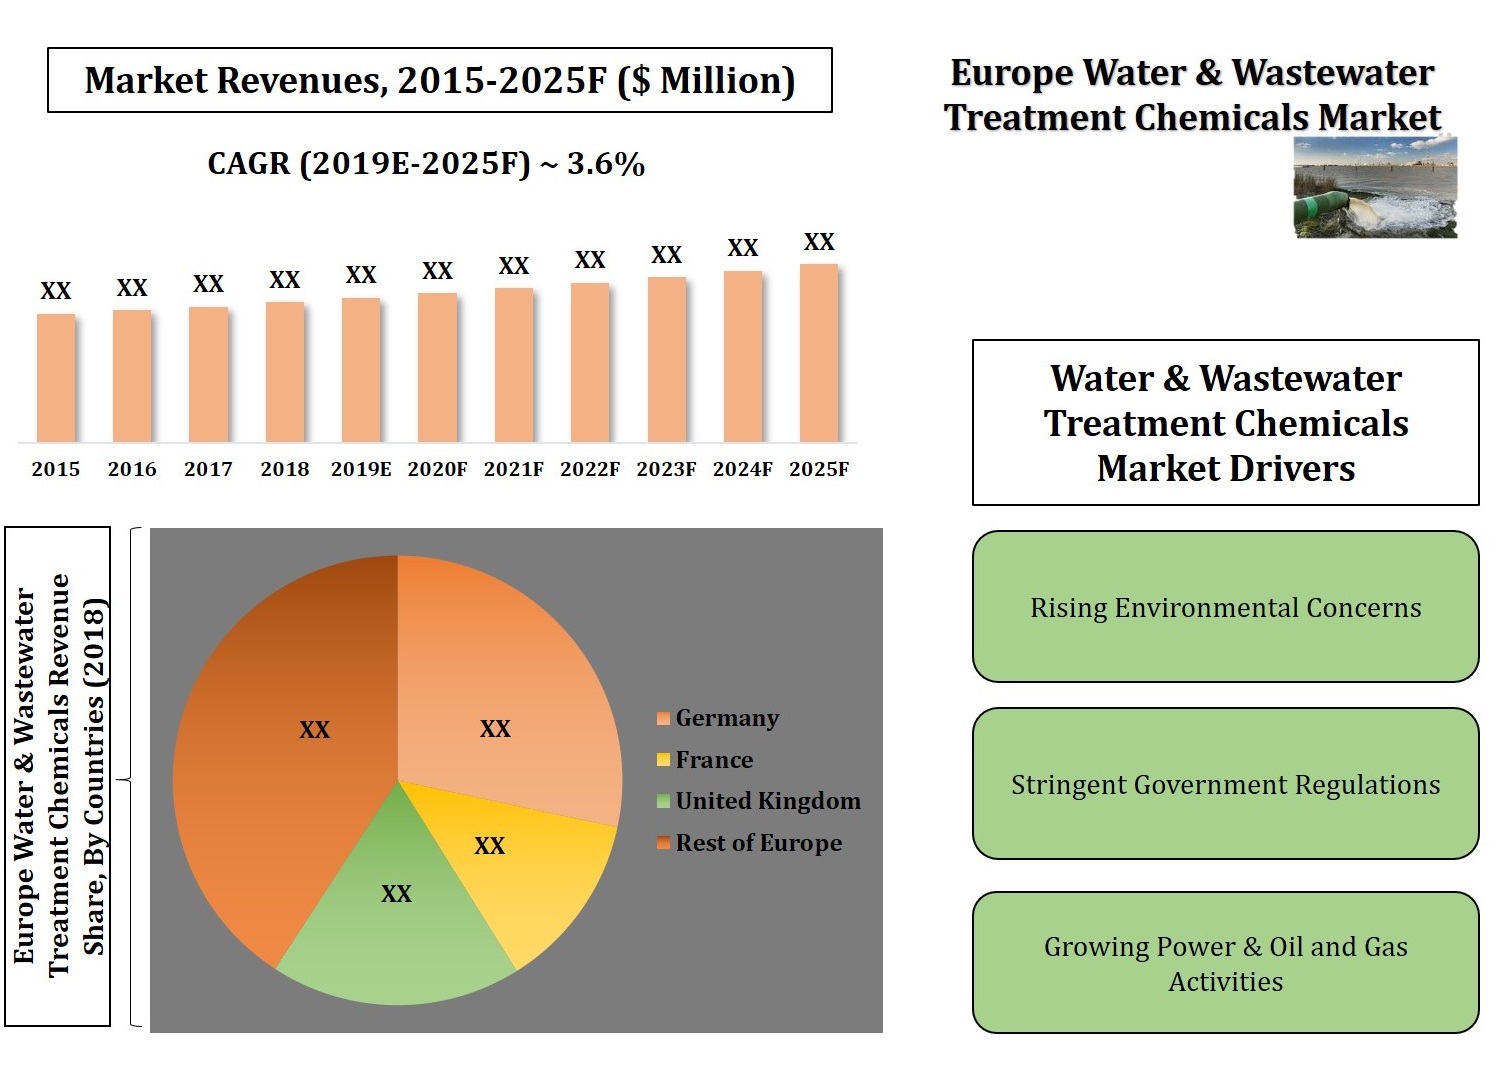 Europe Water & Wastewater Treatment Chemicals Market (2019-2025)